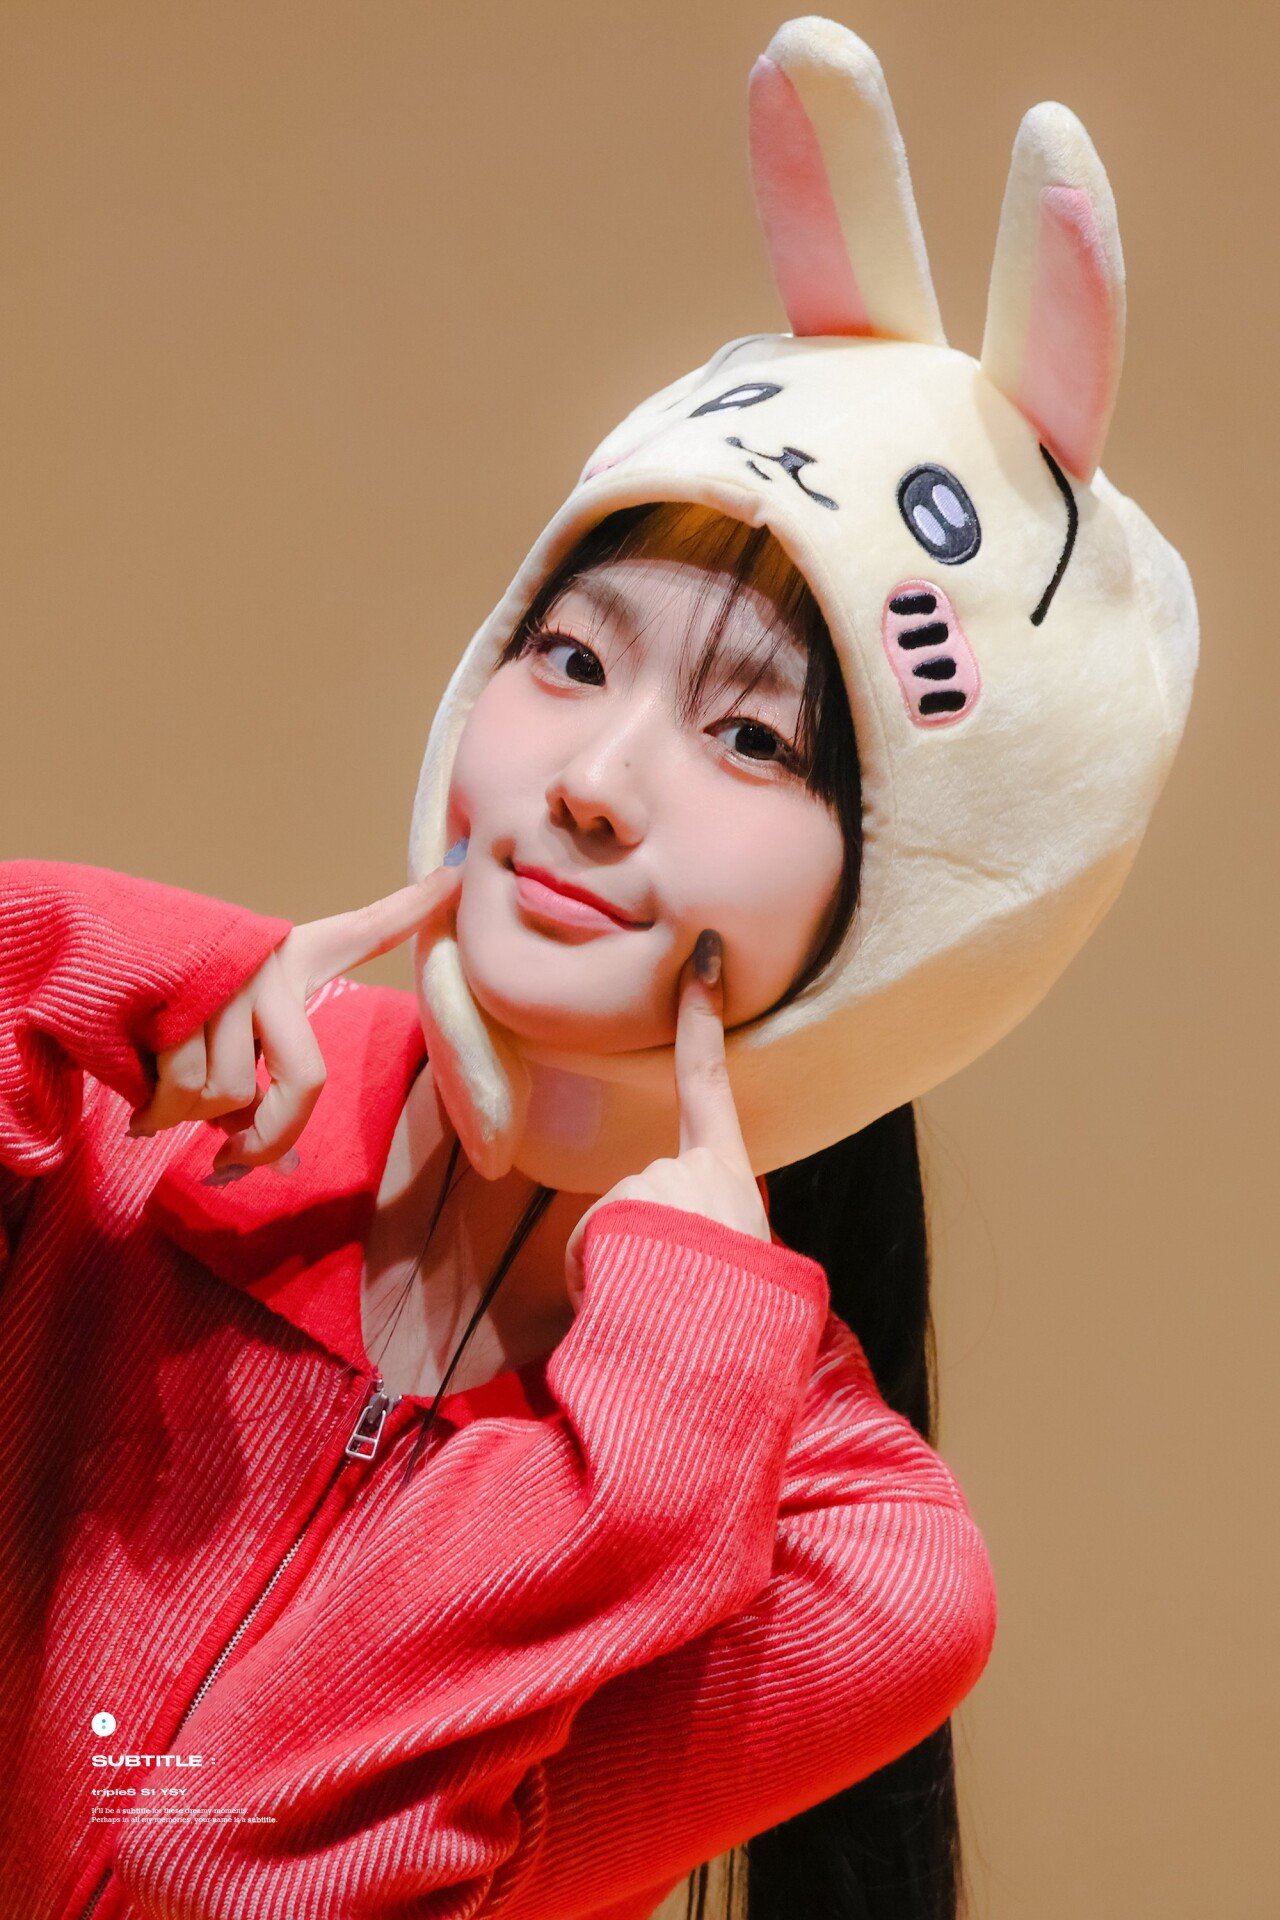 LOVELYZ's fan signing event, YUN SEO YEON